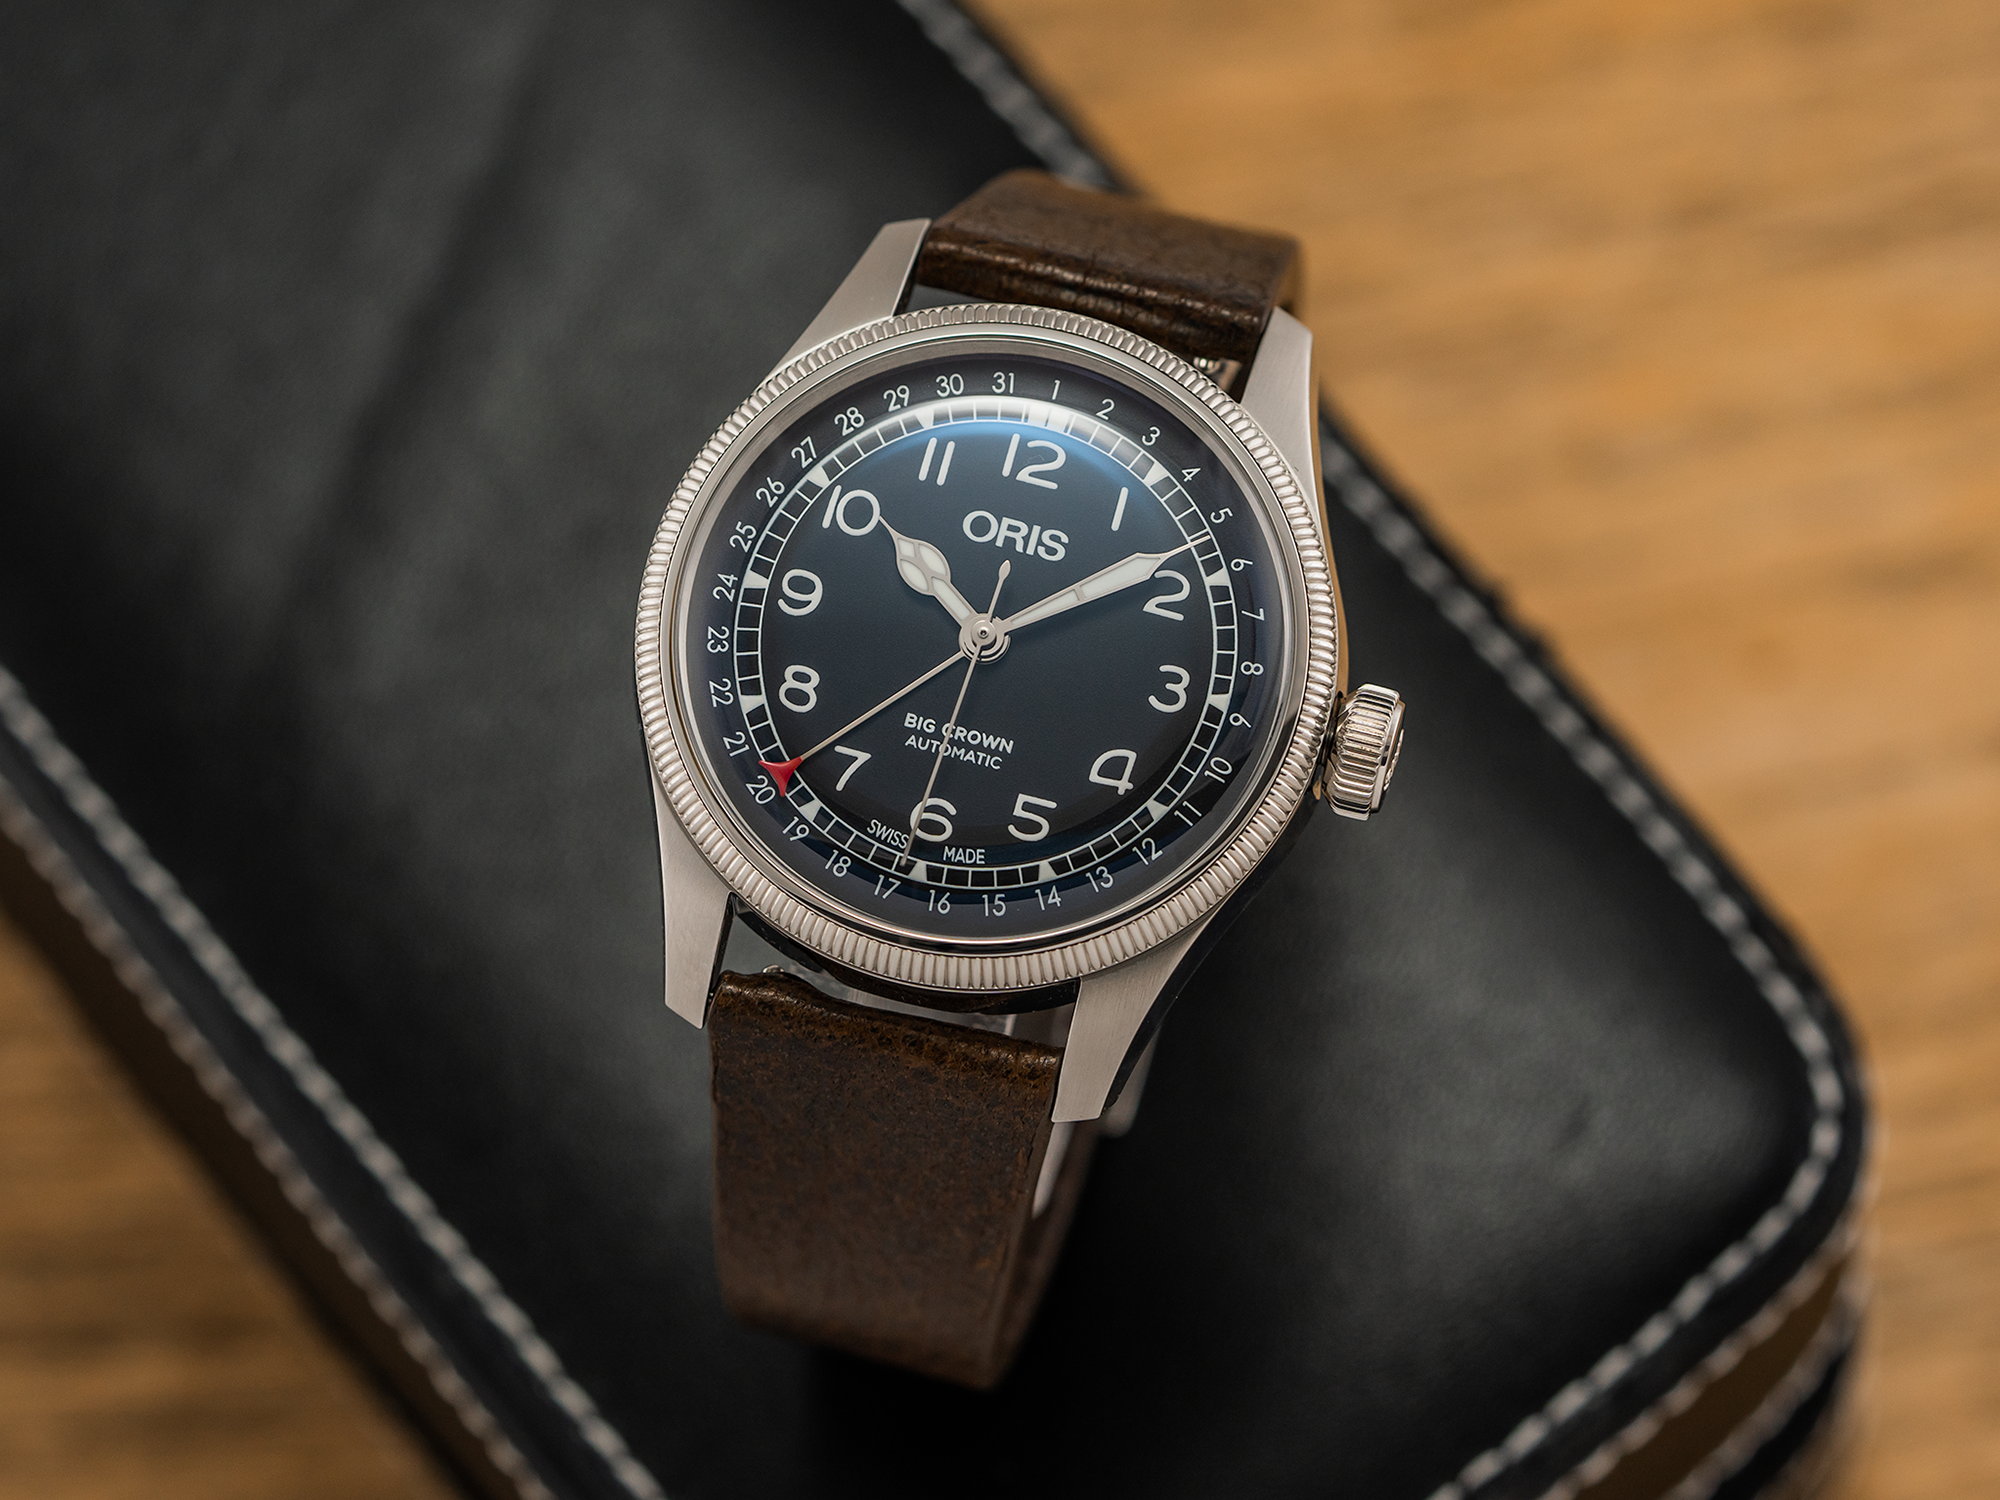 A Great Limited Version Of One Of My Favorite Oris Models